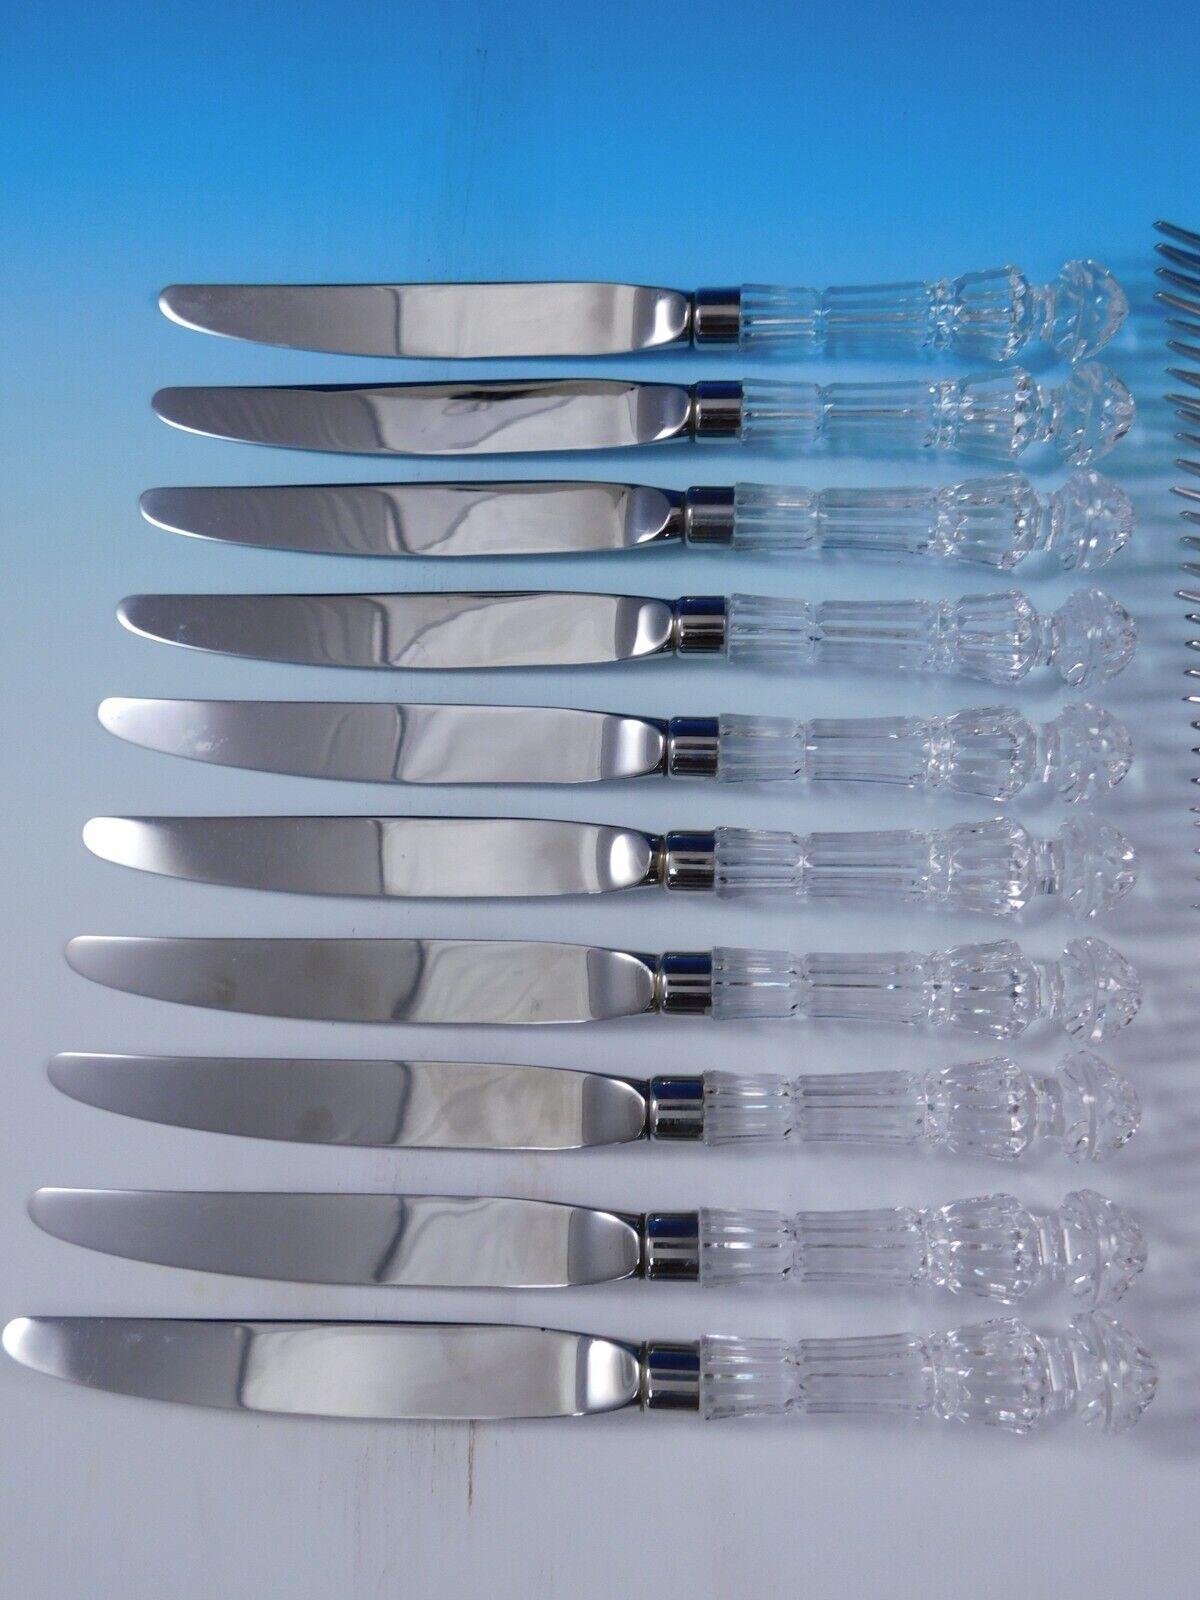 Unusual Waterford Crystal handle with stainless blade/tines flatware lot, 20 pieces. This rare set includes:

10 Large Dinner Size Knives, 10 1/2